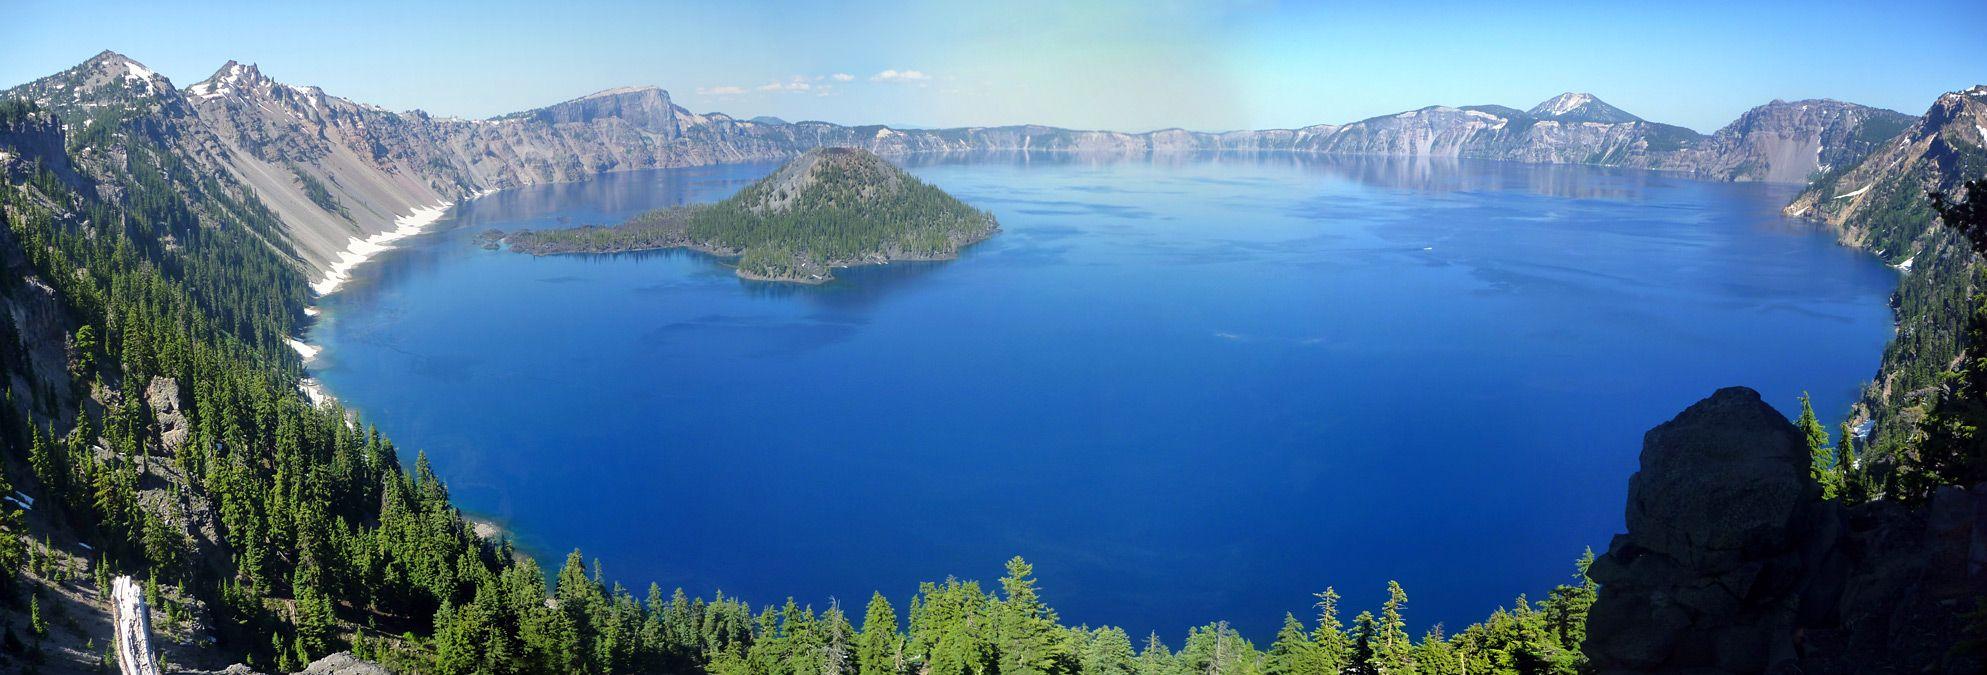 Gallery For > Crater Lake National Park Wallpaper